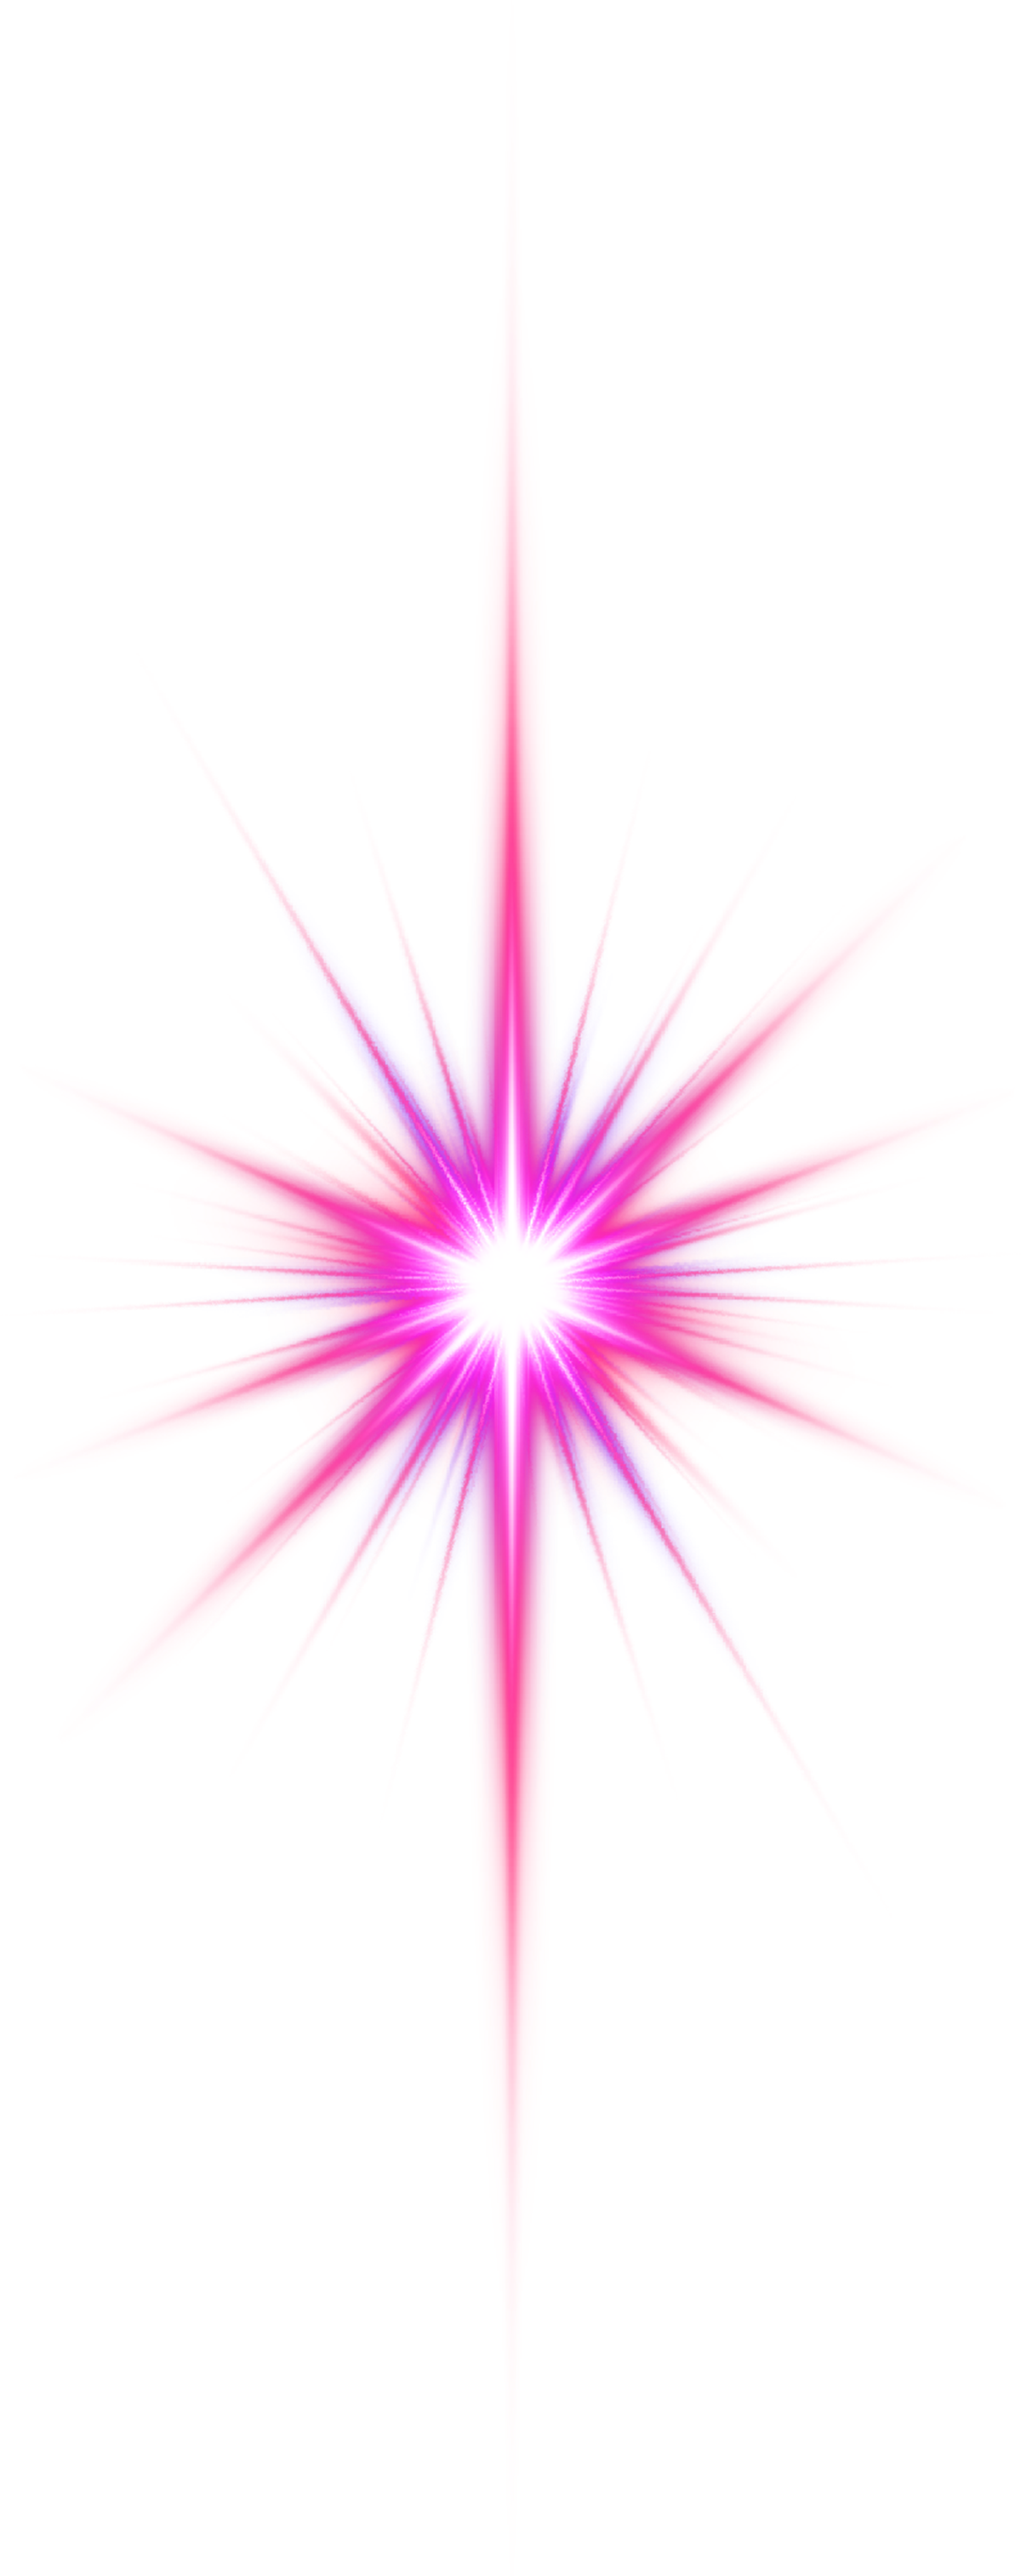 Light Flare PNG Free Image